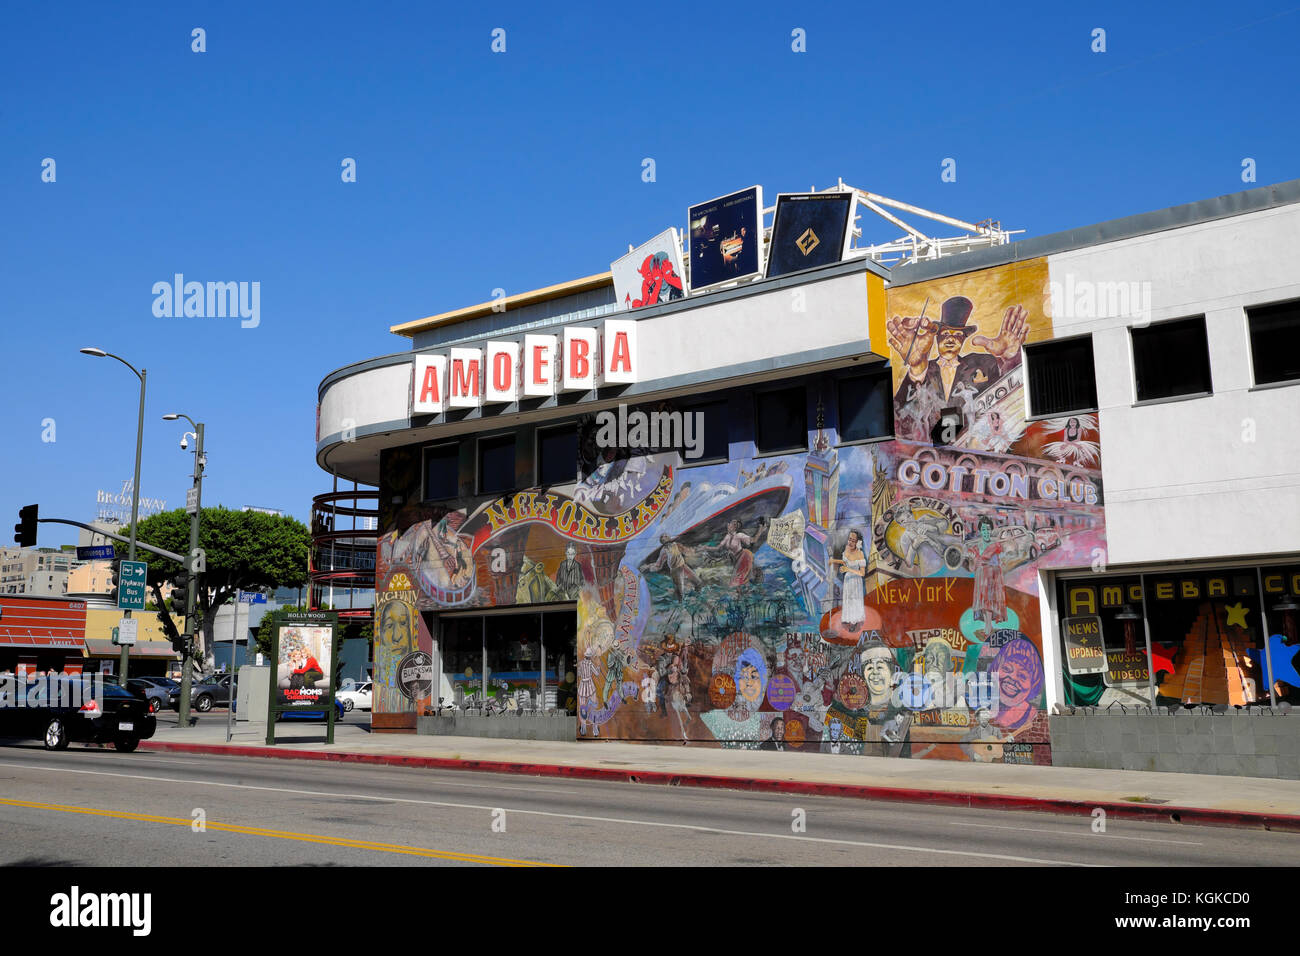 Mural on wall of Amoeba Music record store selling records on Sunset Boulevard in LA Los Angeles, California USA  KATHY DEWITT Stock Photo